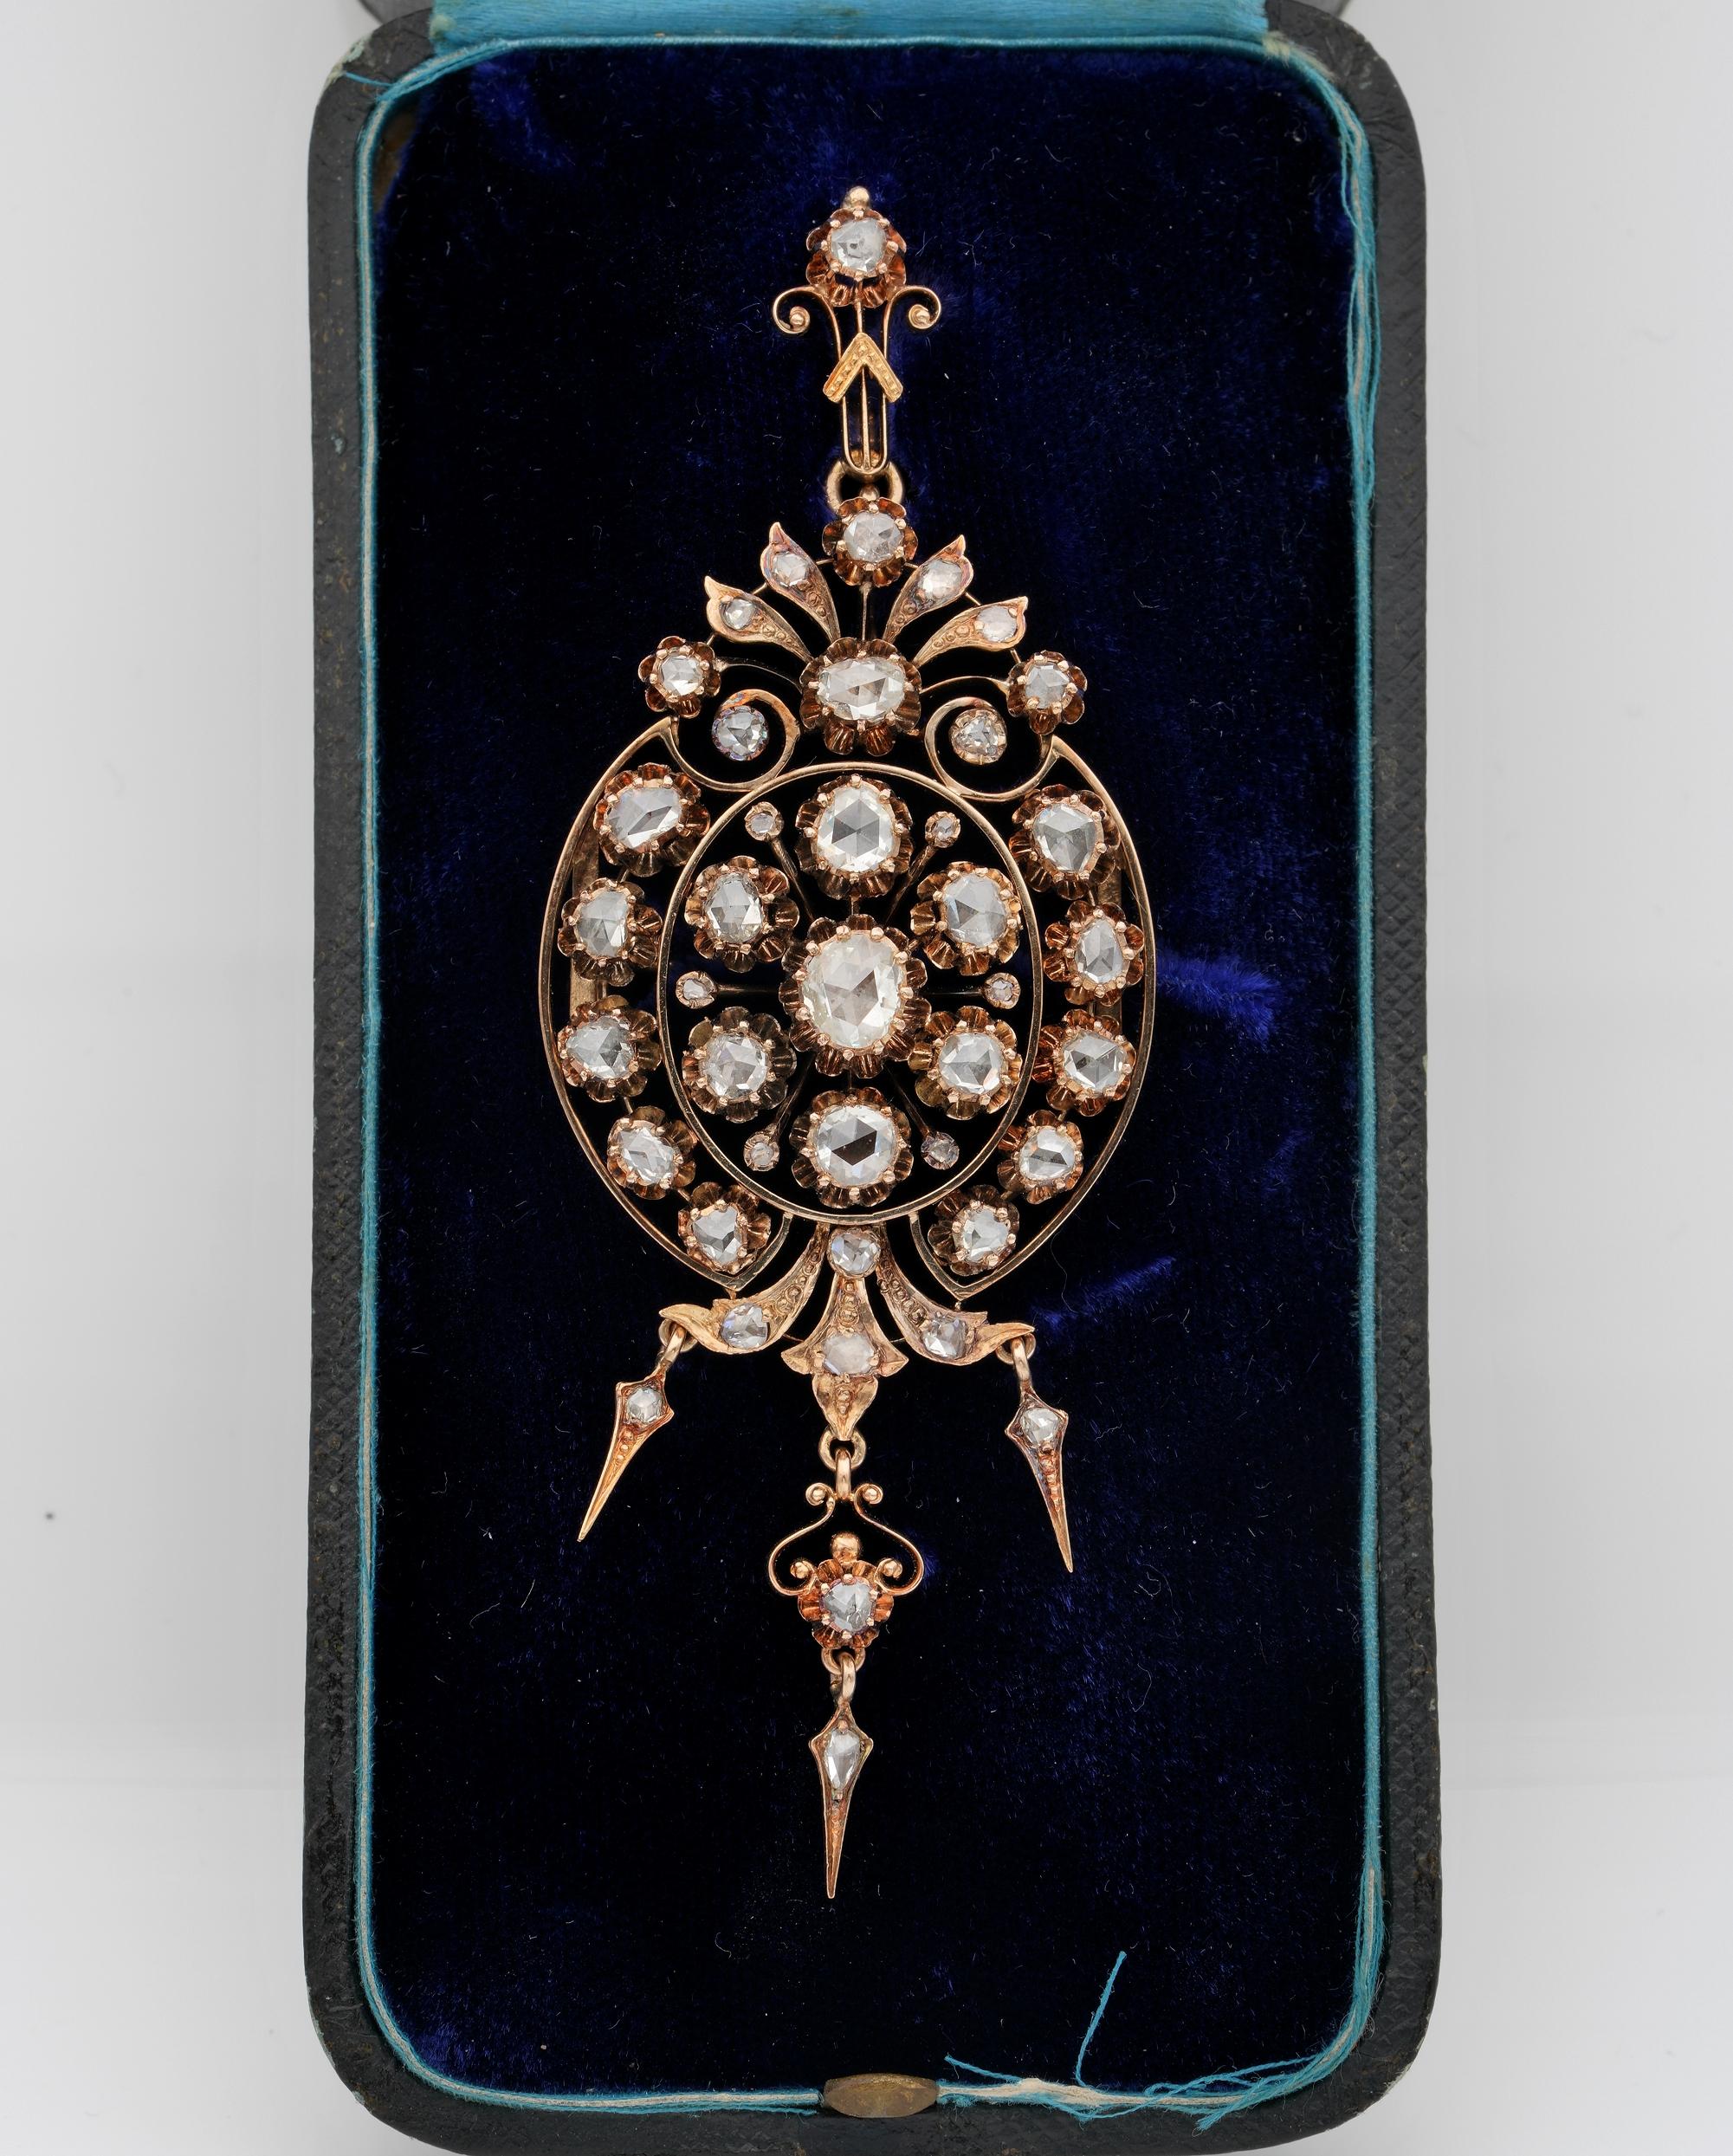 Glorious Victorian
Rare brooch , pendant or stomacher from the Victorian period – 1880 ca
Glorious design as you would admire on a Victorian royal portrait, artfully crafted during the time of 16/17 KT tested- solid gold, measures an impressive 10